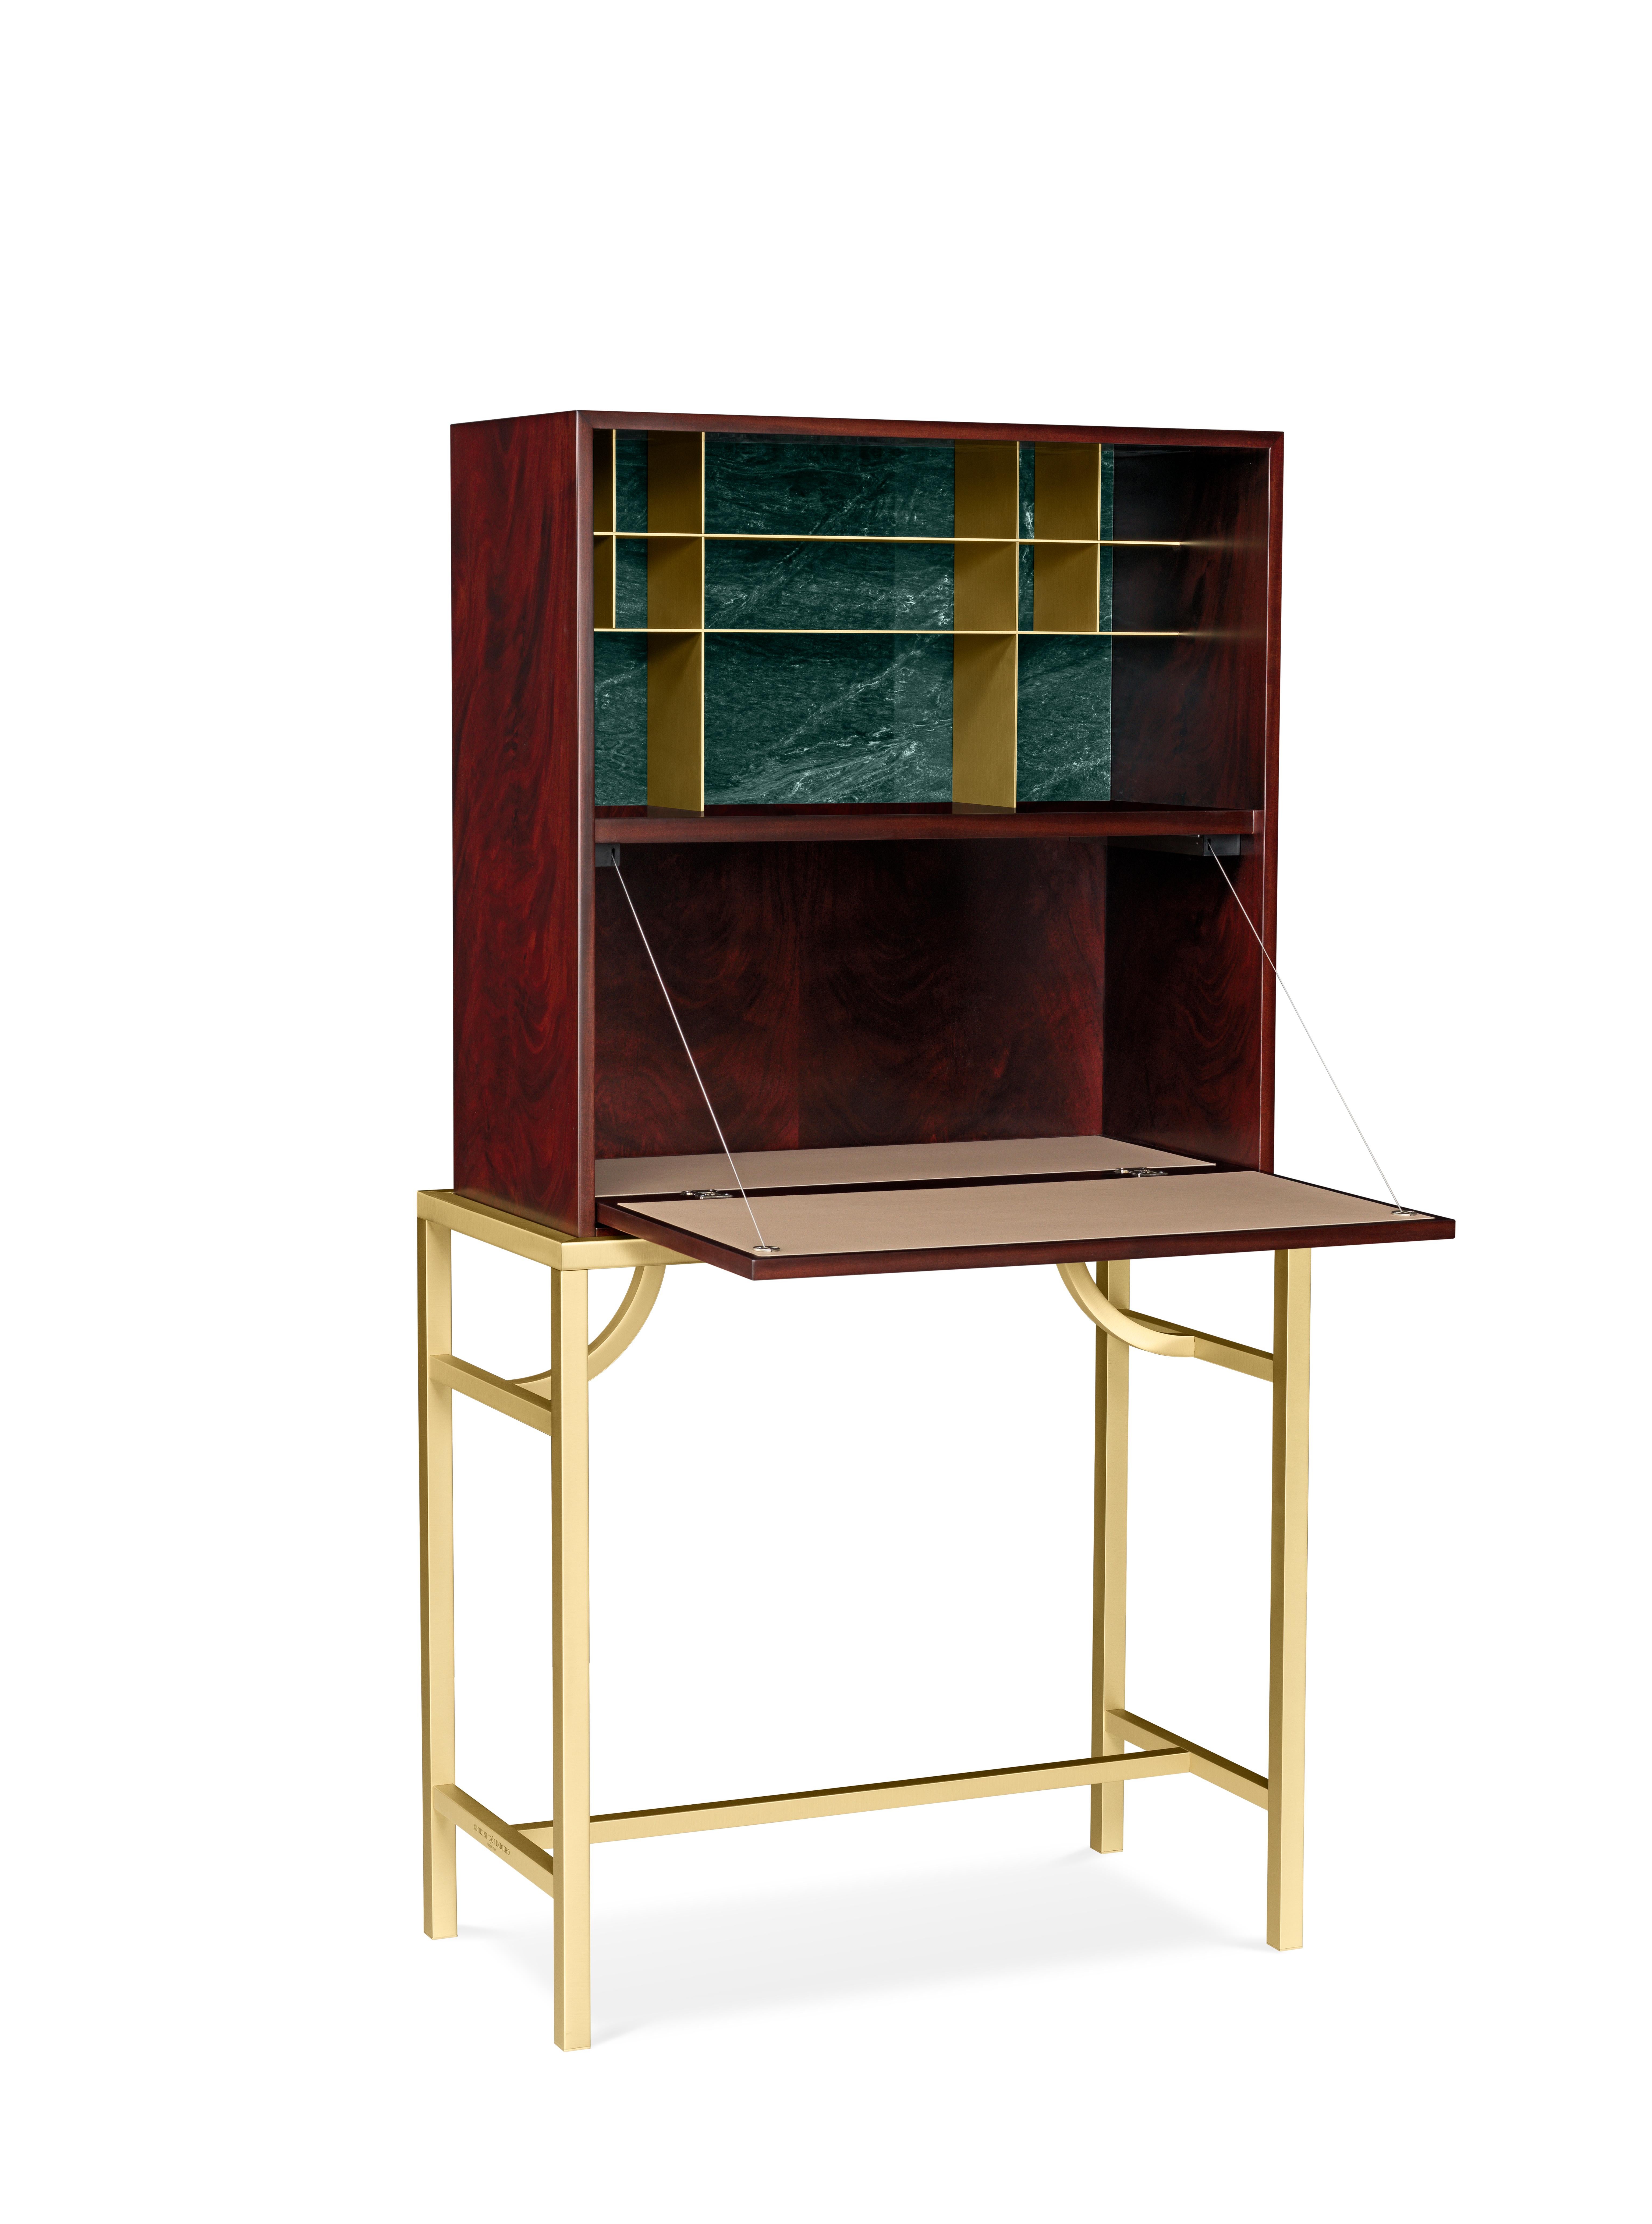 Italian Zuan Large Cabinet in Satin Brass Legs with Mahogany Wood by Paolo Rizzatto For Sale